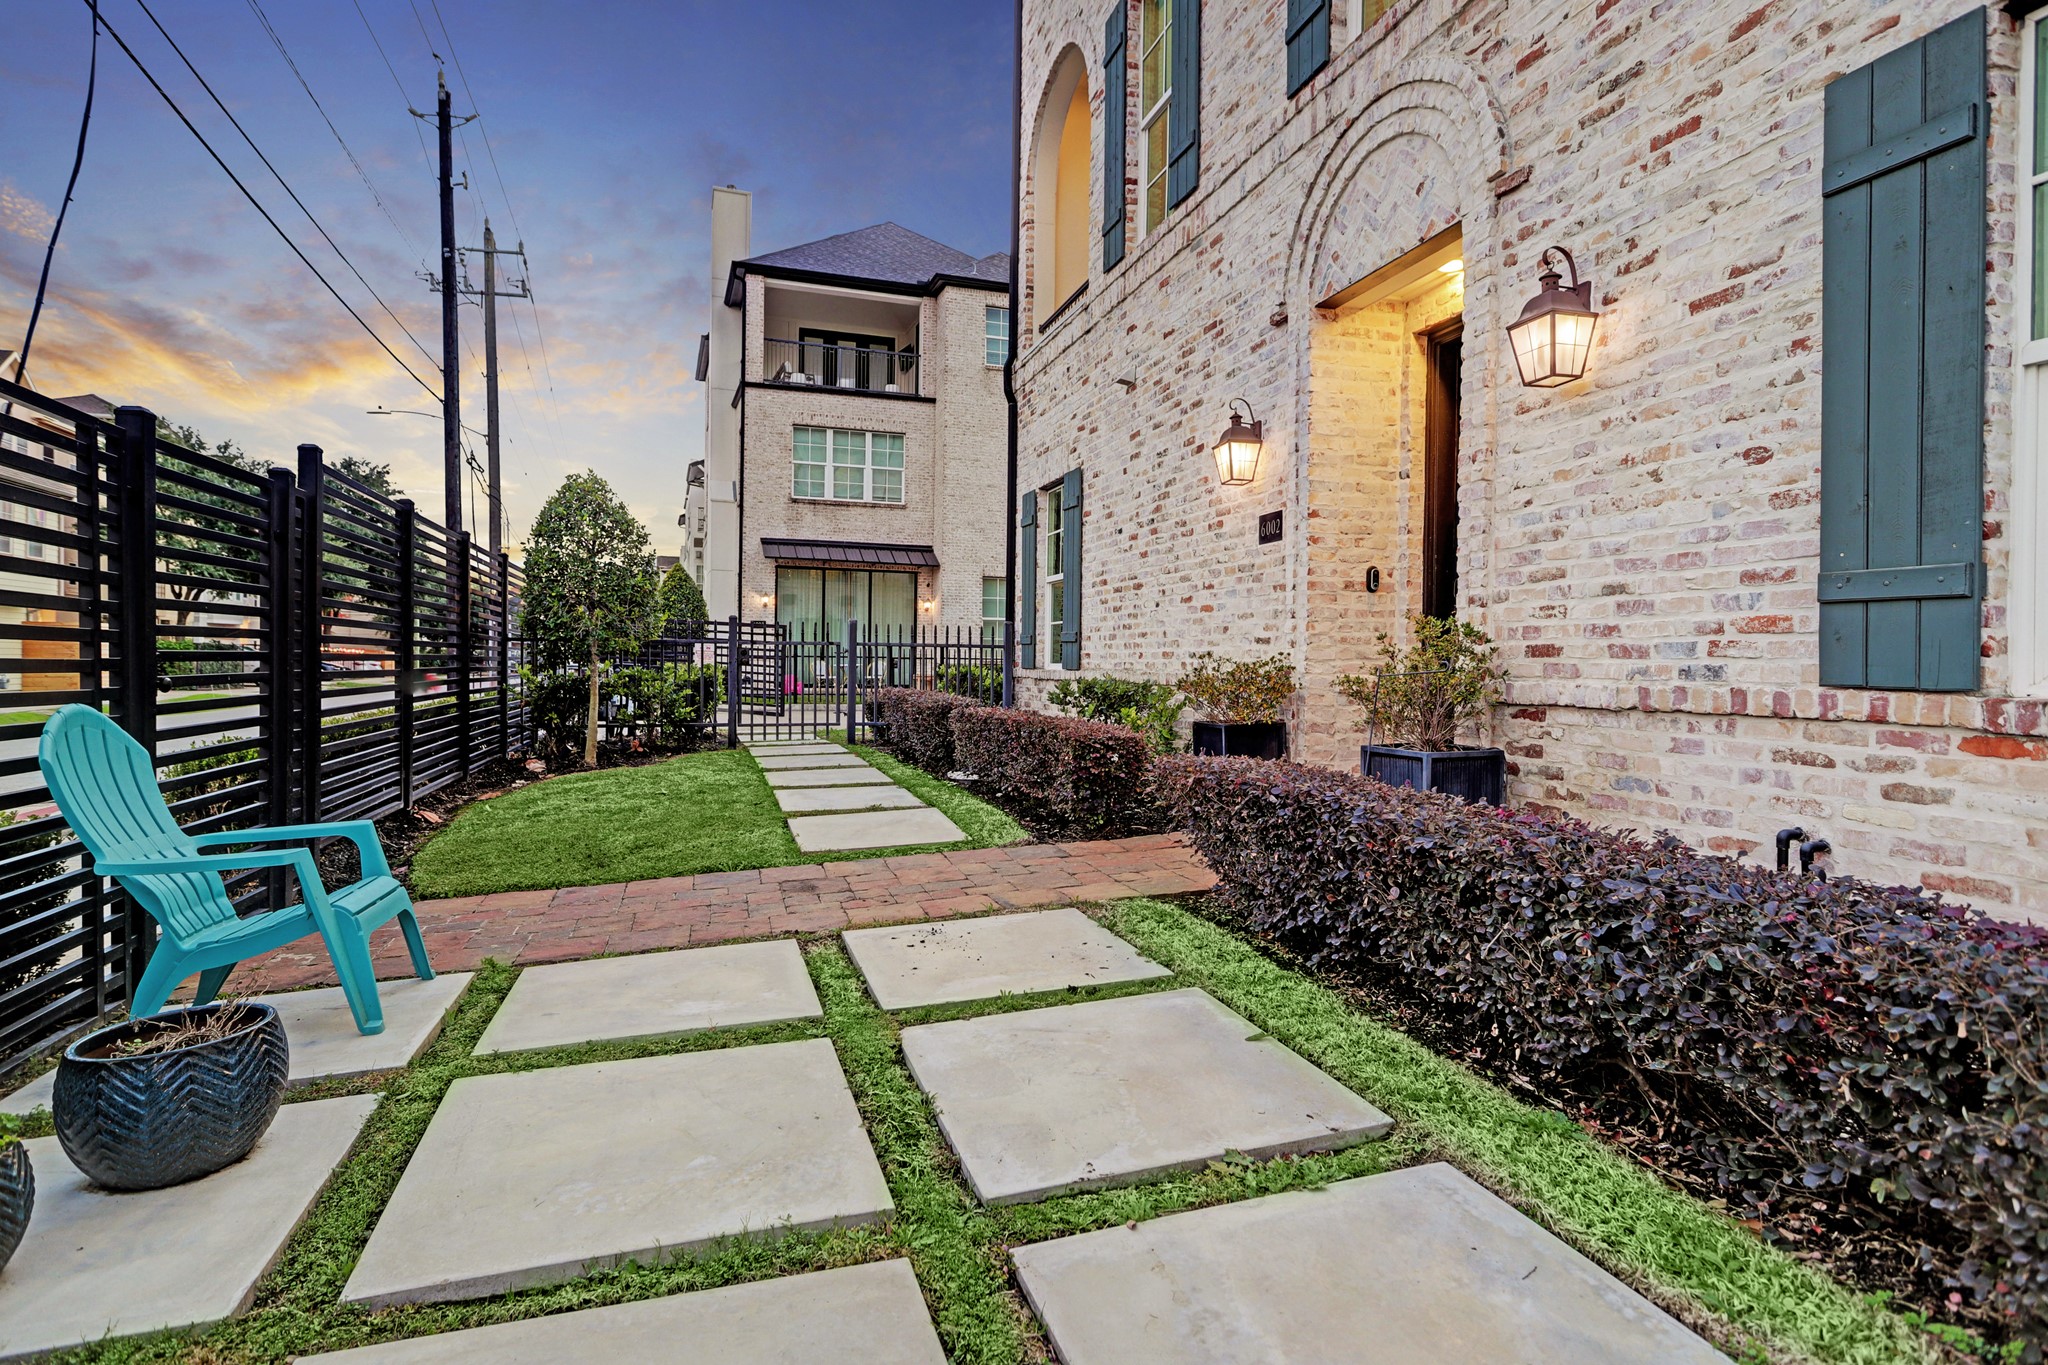 The yard is maintained by the HOA for an enjoyable low-maintenance private green space. The yard has secure, gated access to both the street (allowing for convenient guest parking and access), and inside the community.